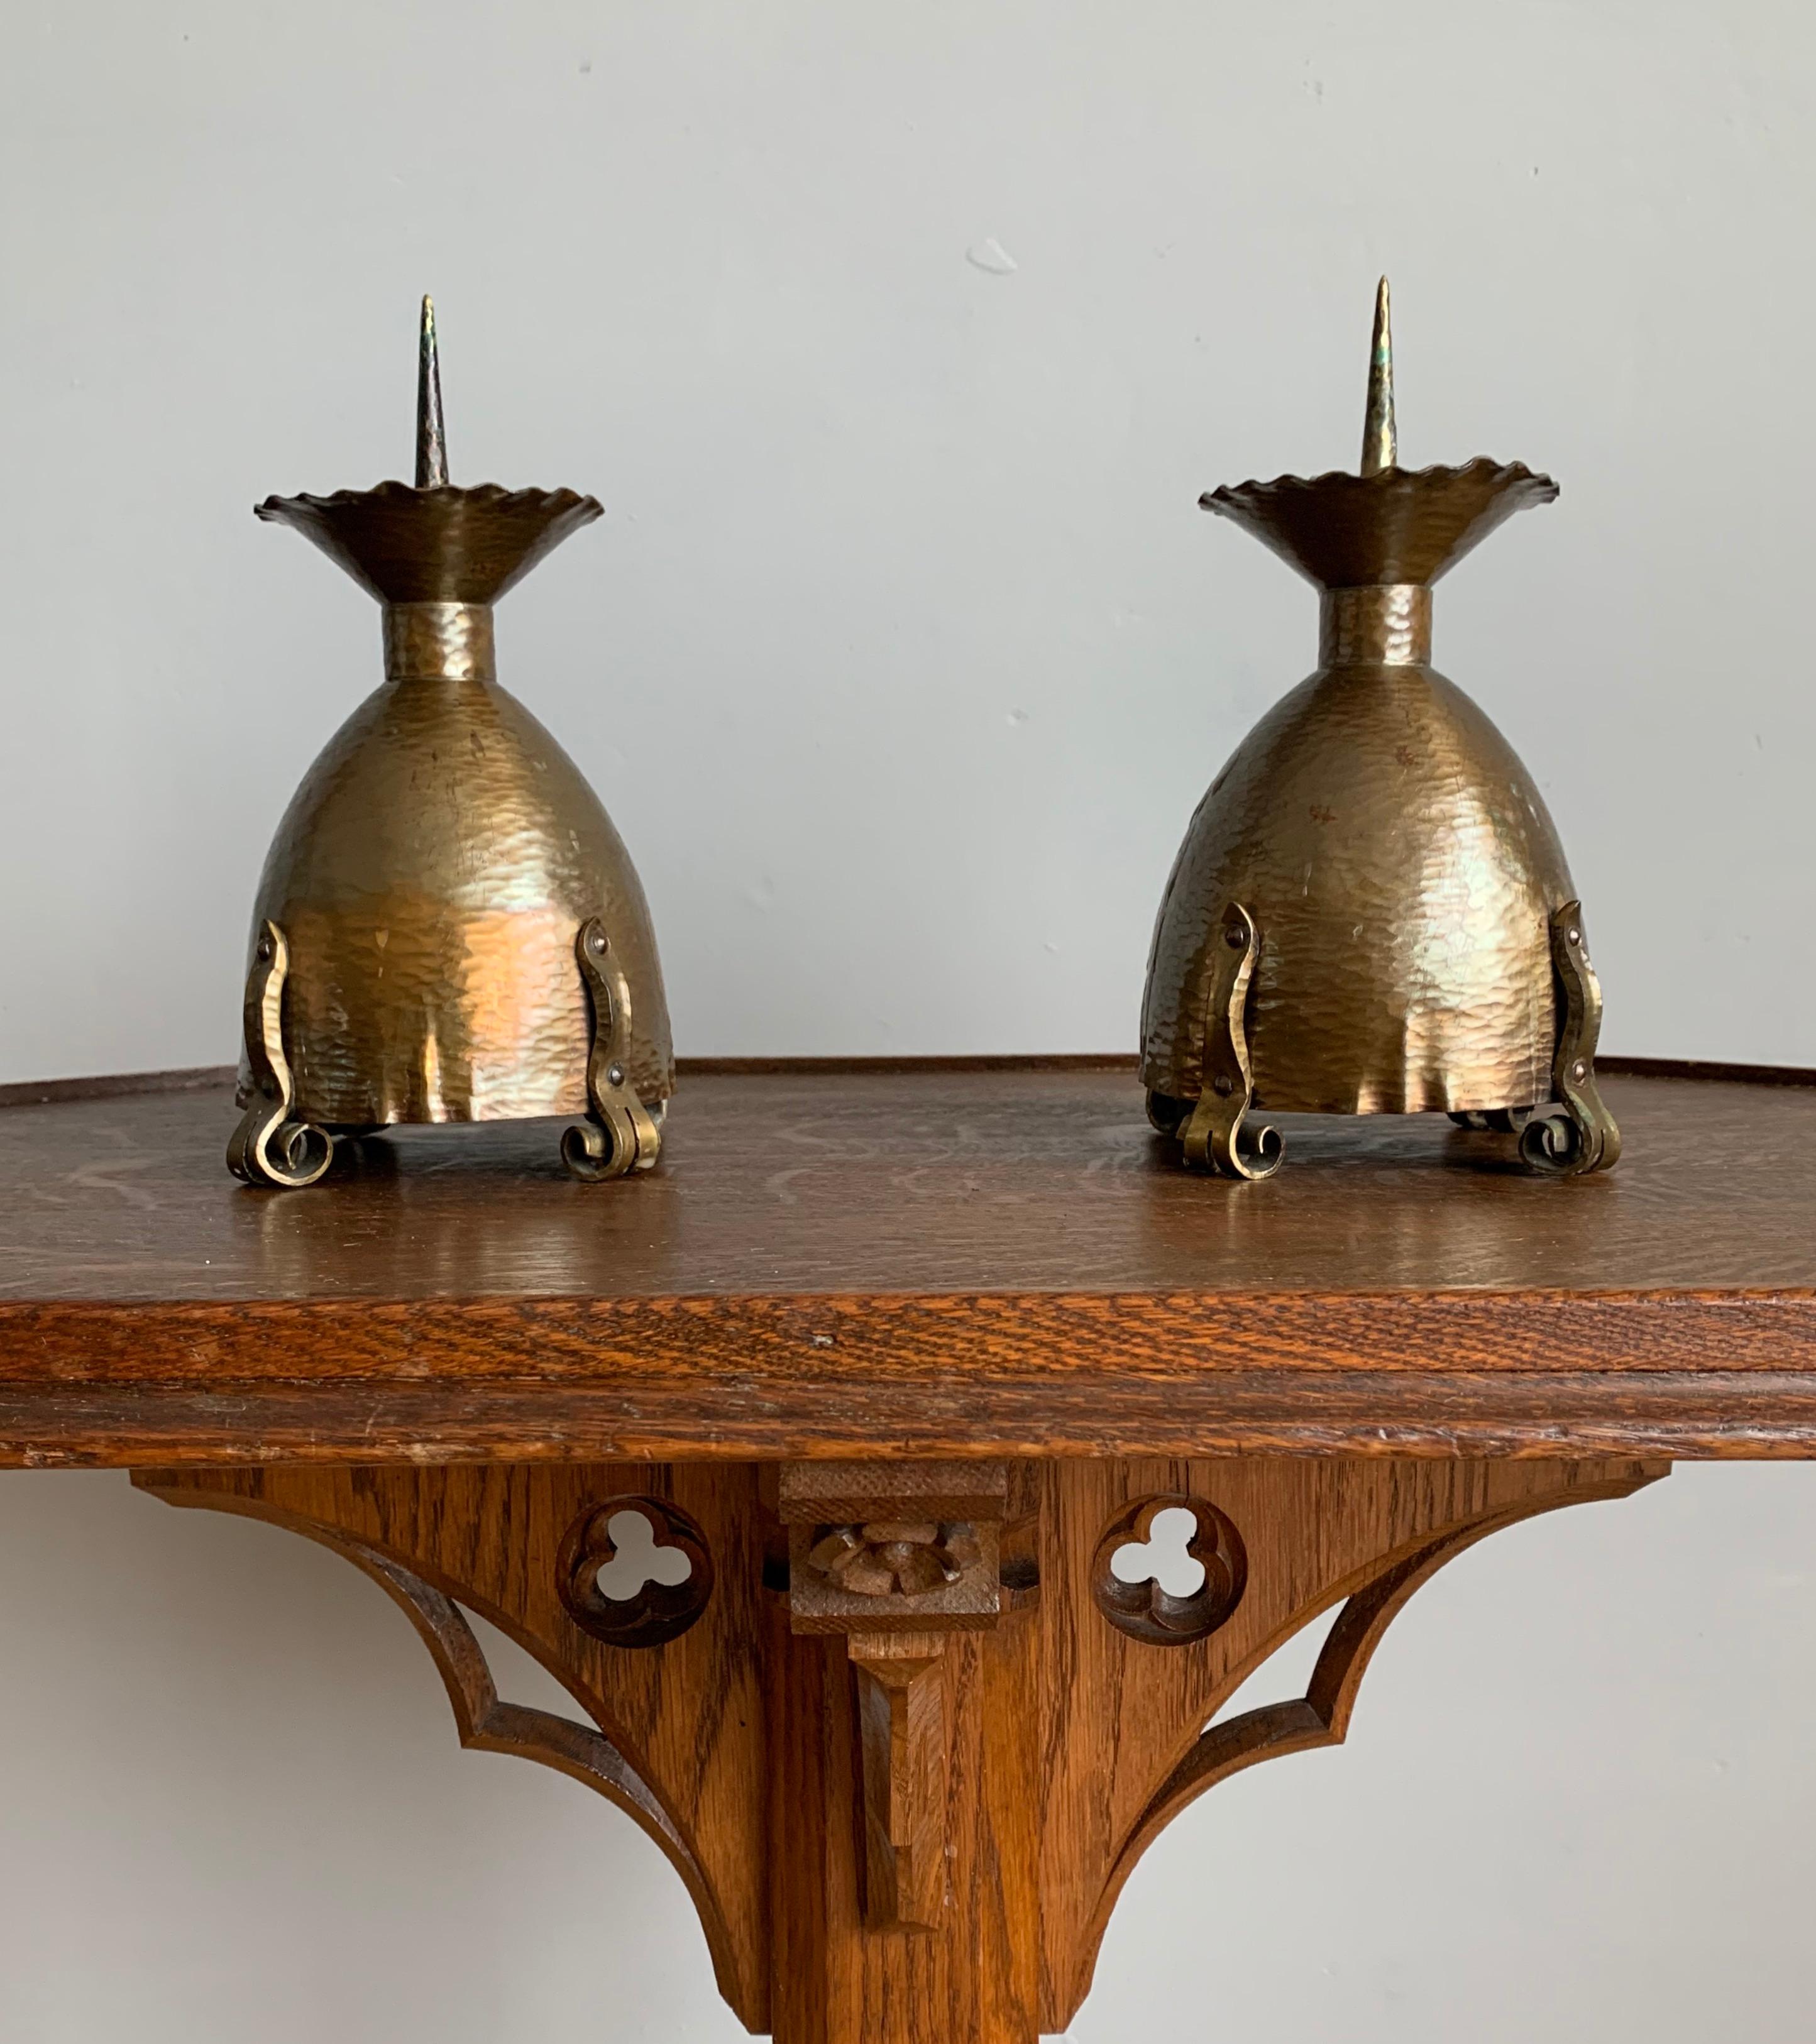 Beautiful and very stylish pair of Gothic candlesticks made in the Arts & Crafts era.

If you are looking for rare and good quality antiques in the Gothic style to grace your living space then this hand forged and timeless pair could be yours to own